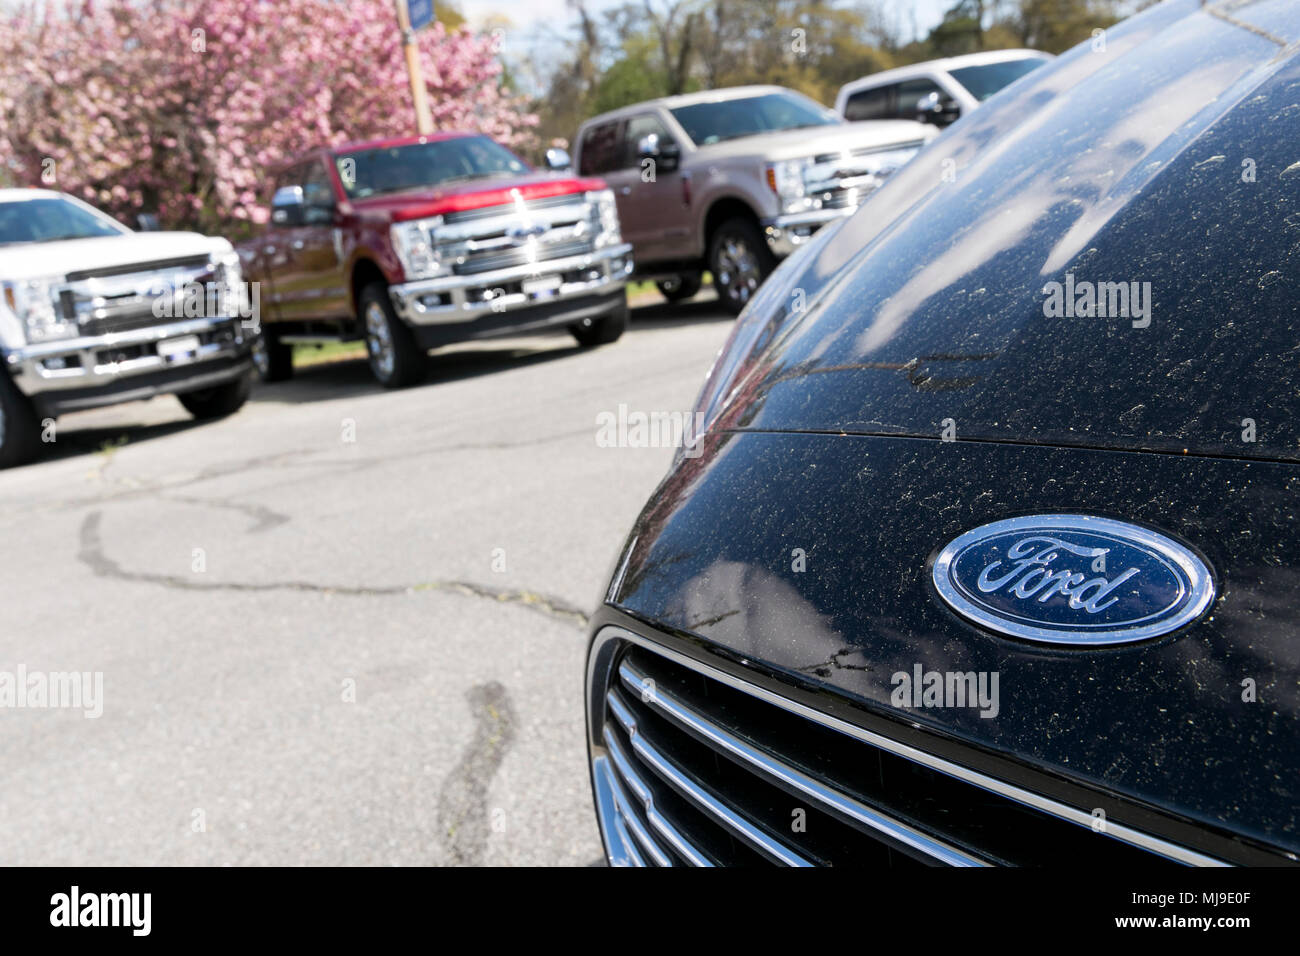 Ford Fiesta, Focus and Fusion passenger cars on a dealer lot with Pick-up trucks it the background in Seaford, Delaware on April 29, 2018. Stock Photo